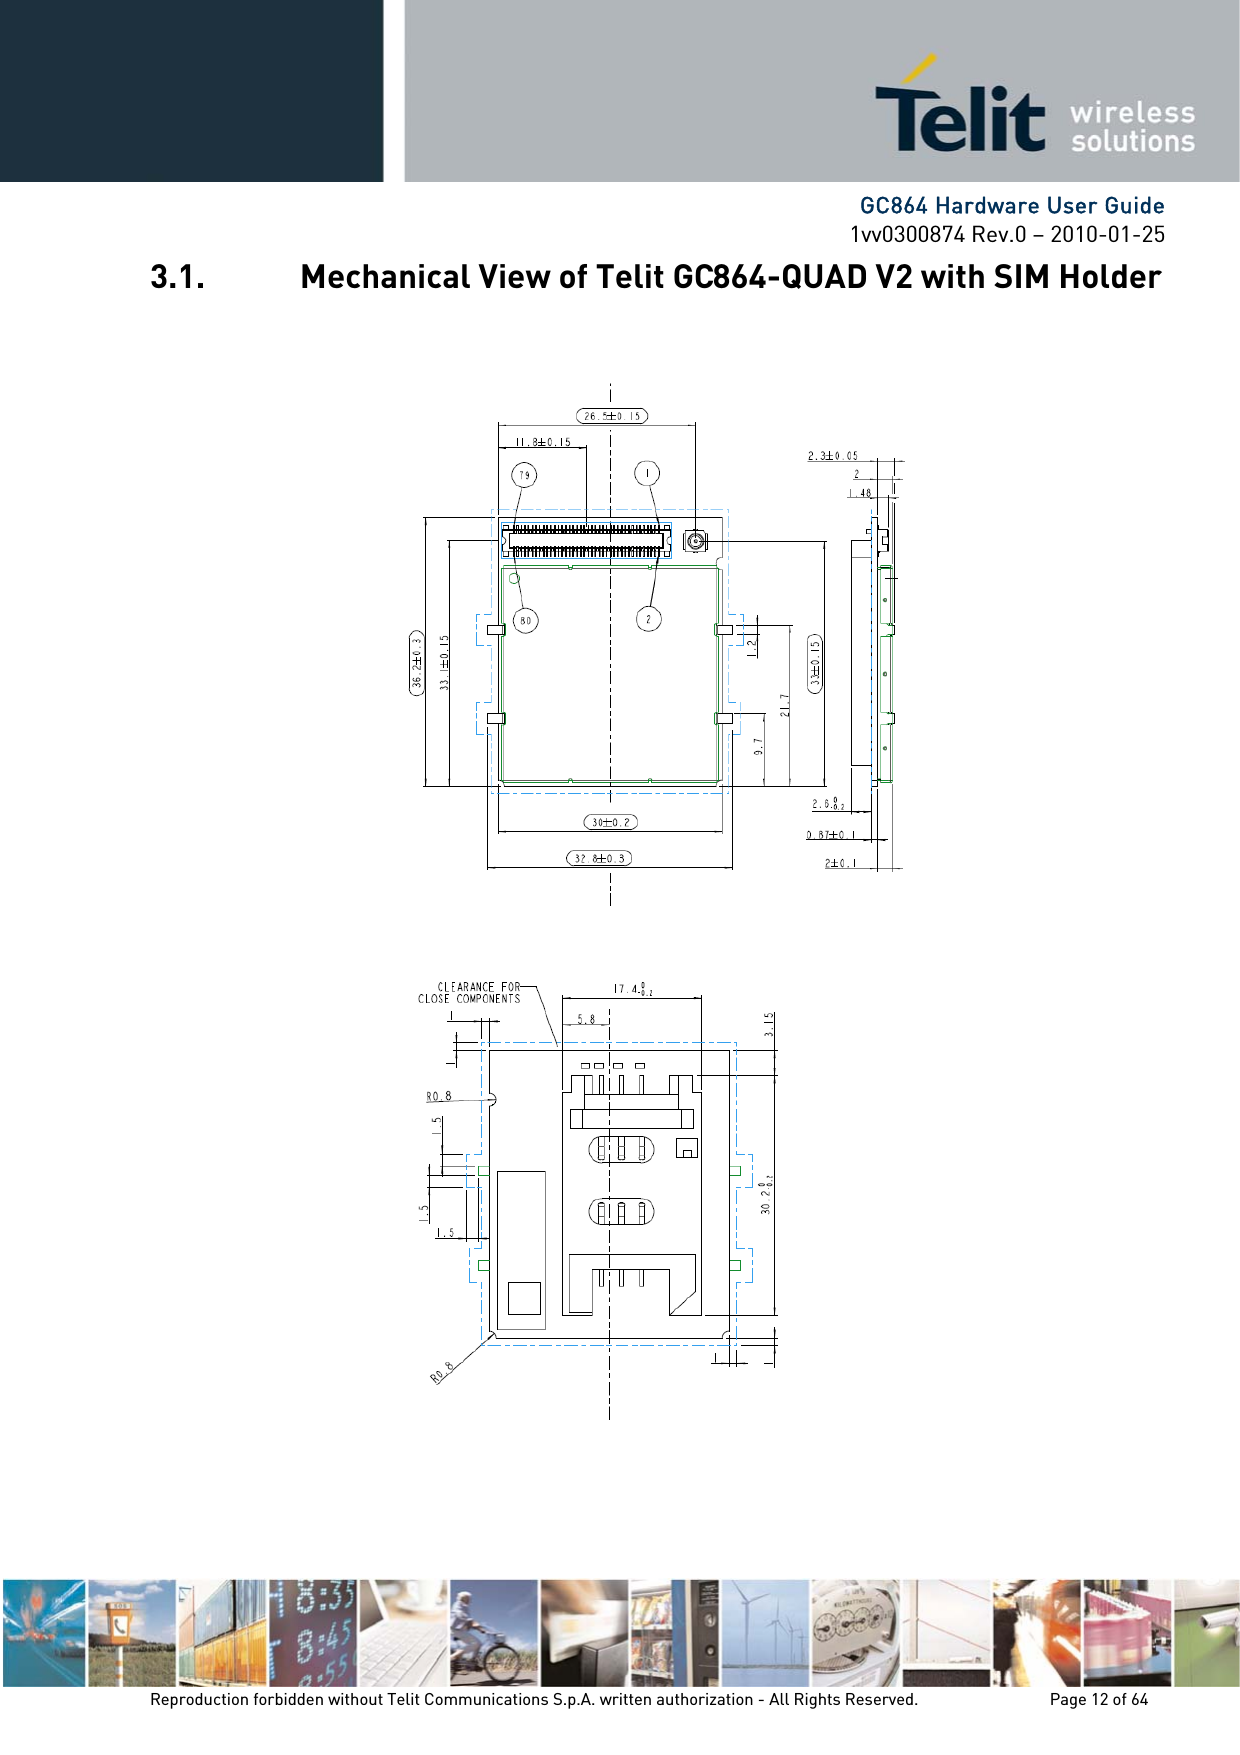      GC864 Hardware User Guide 1vv0300874 Rev.0 – 2010-01-25 Reproduction forbidden without Telit Communications S.p.A. written authorization - All Rights Reserved.    Page 12 of 64  3.1. Mechanical View of Telit GC864-QUAD V2 with SIM Holder 